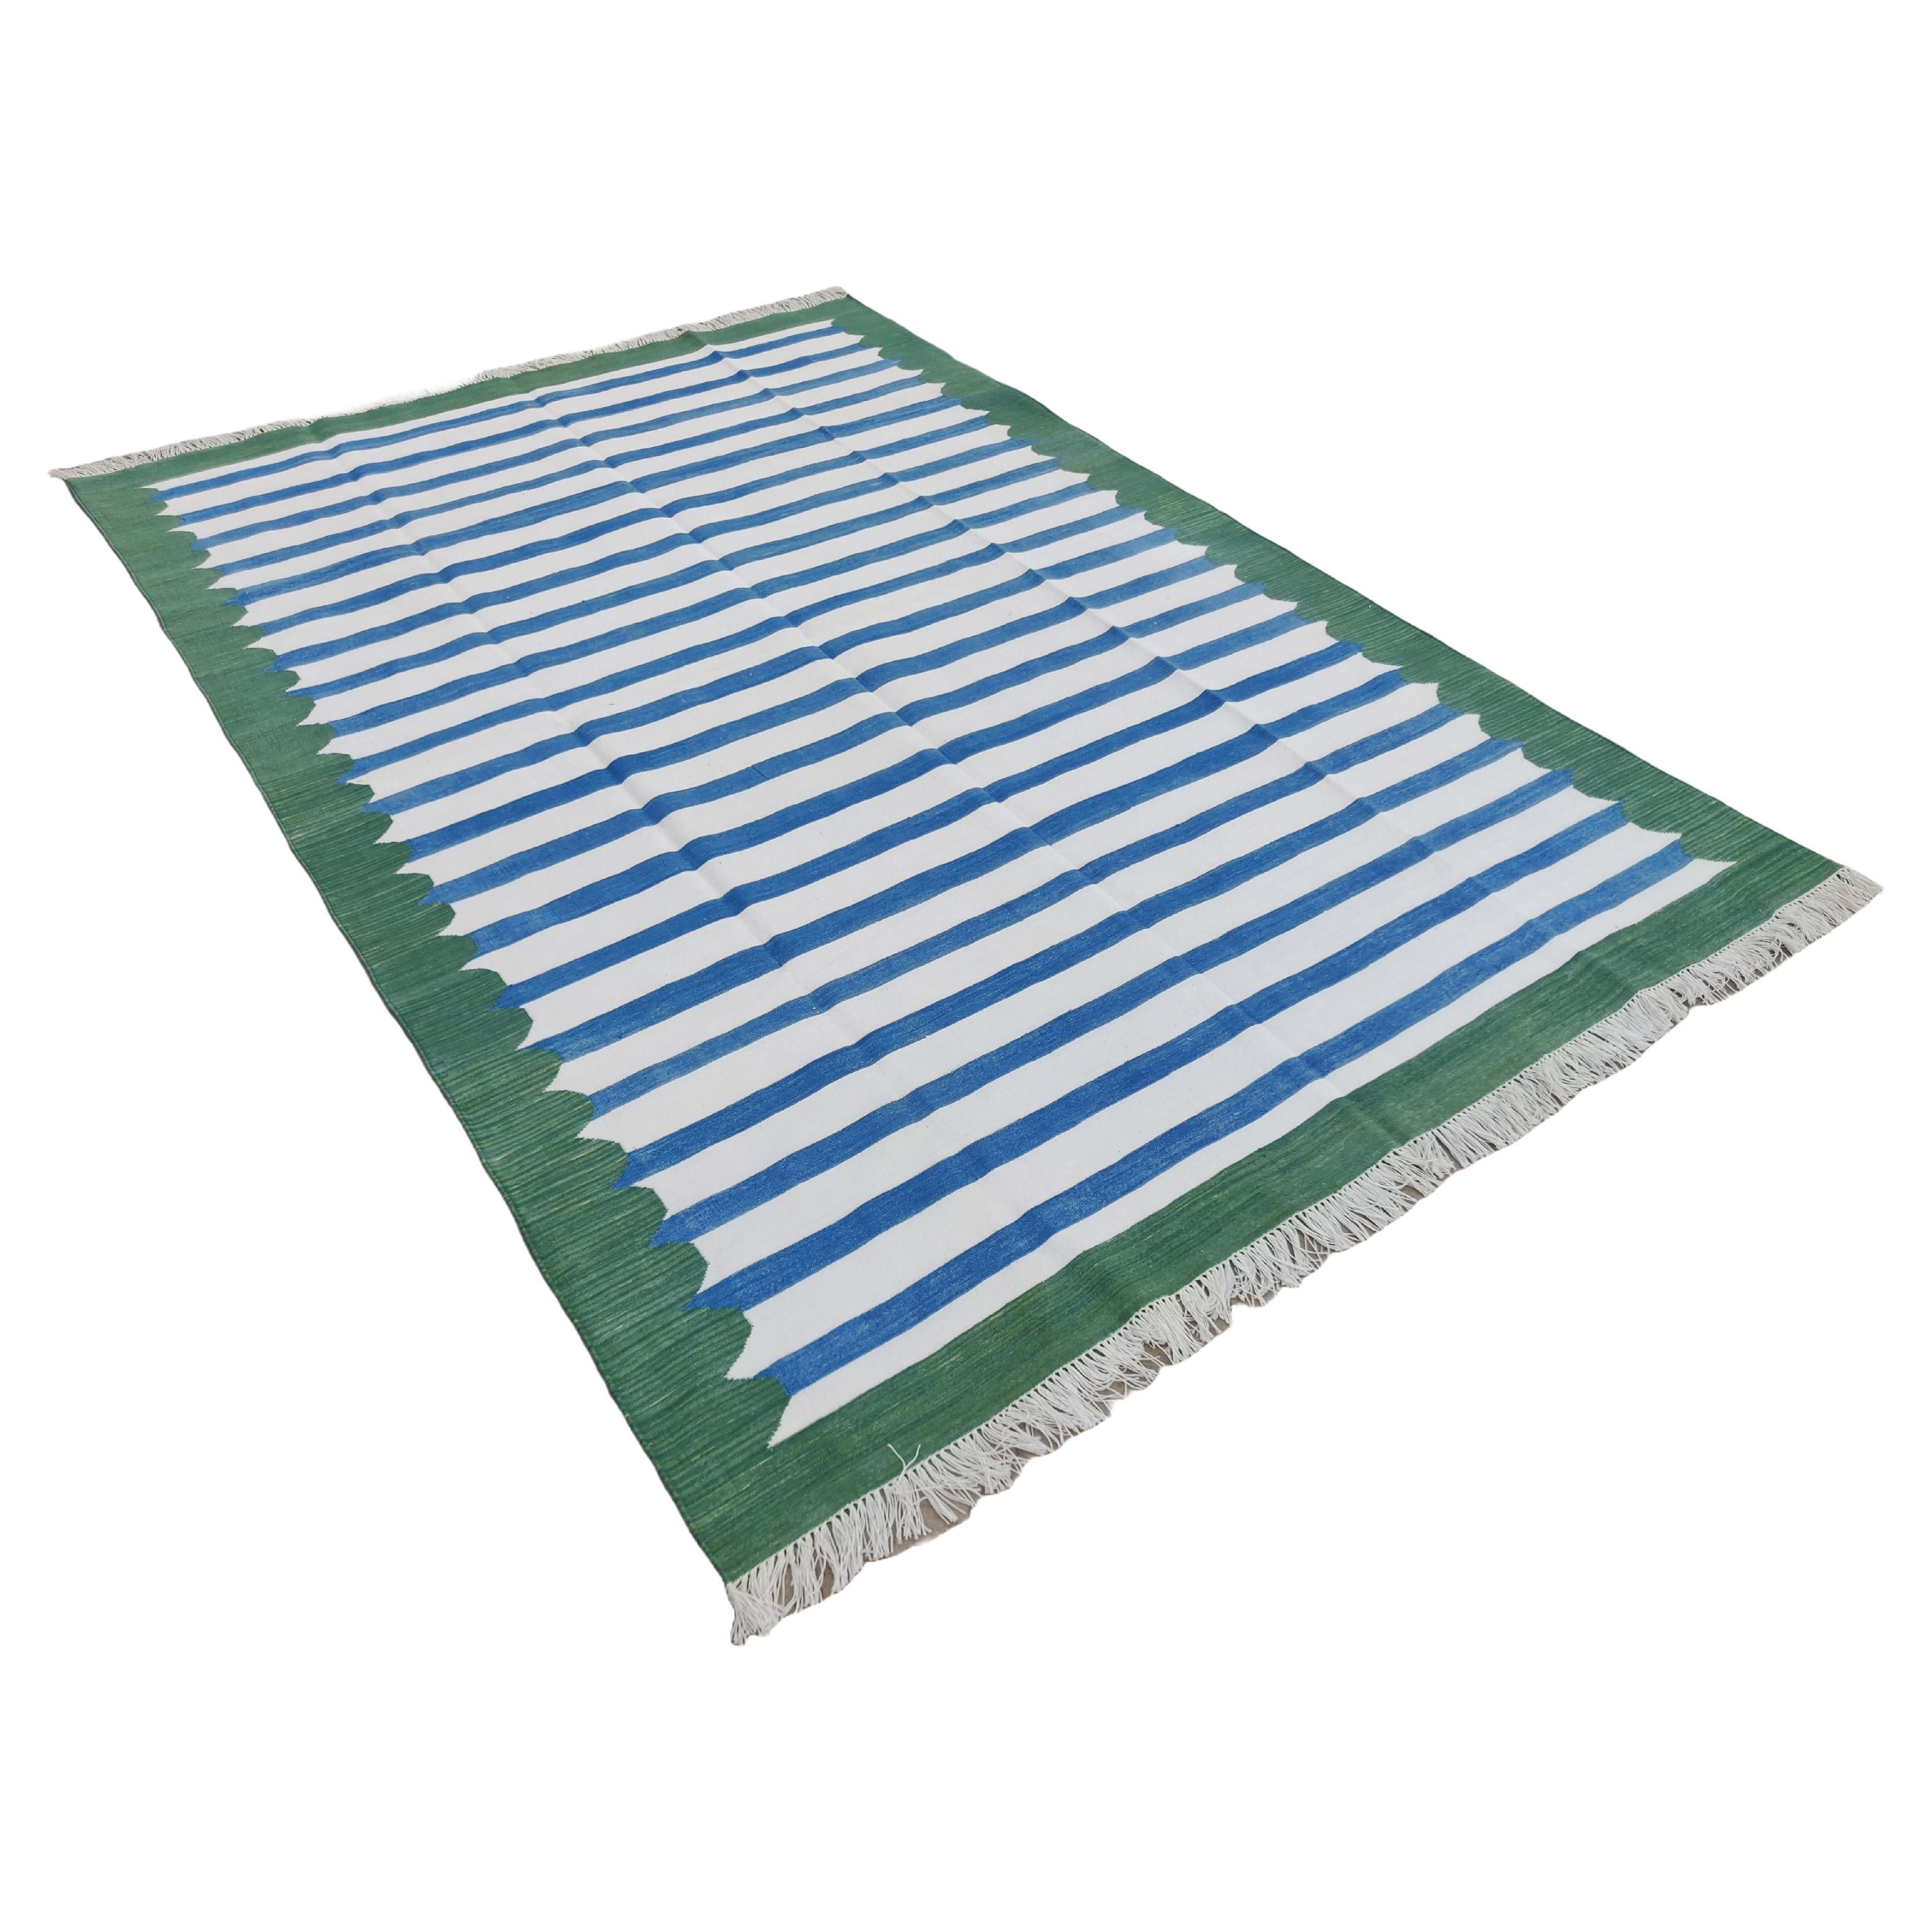 Handmade Cotton Area Flat Weave Rug, 6x9 Blue And Green Striped Indian Dhurrie For Sale